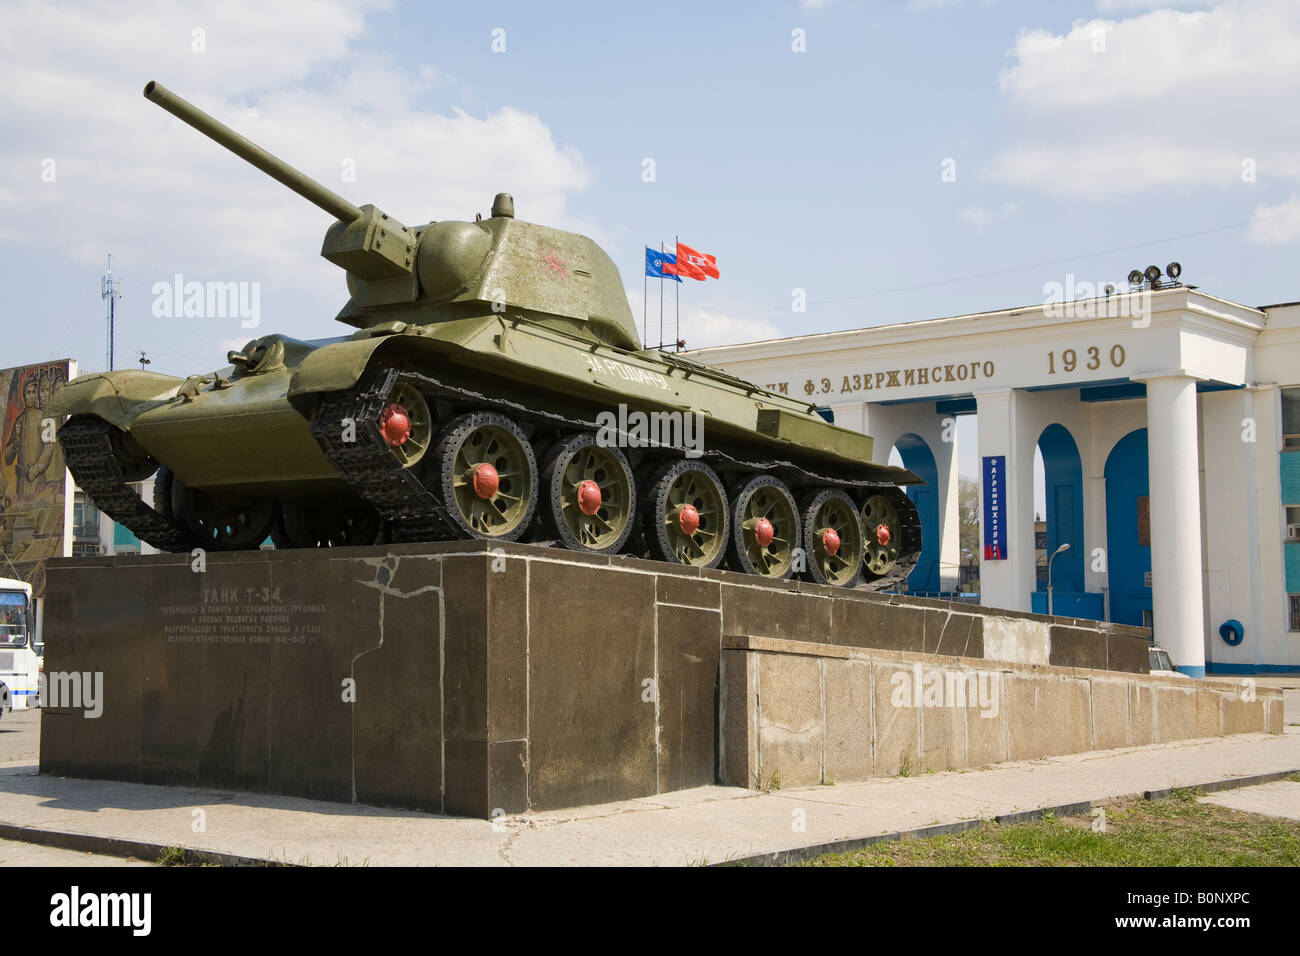 Soviet T-34 Tank in front of the Dzerzhinsky Tractor Factory, Volgograd (formerly Stalingrad), Russia, Russian Federation Stock Photo